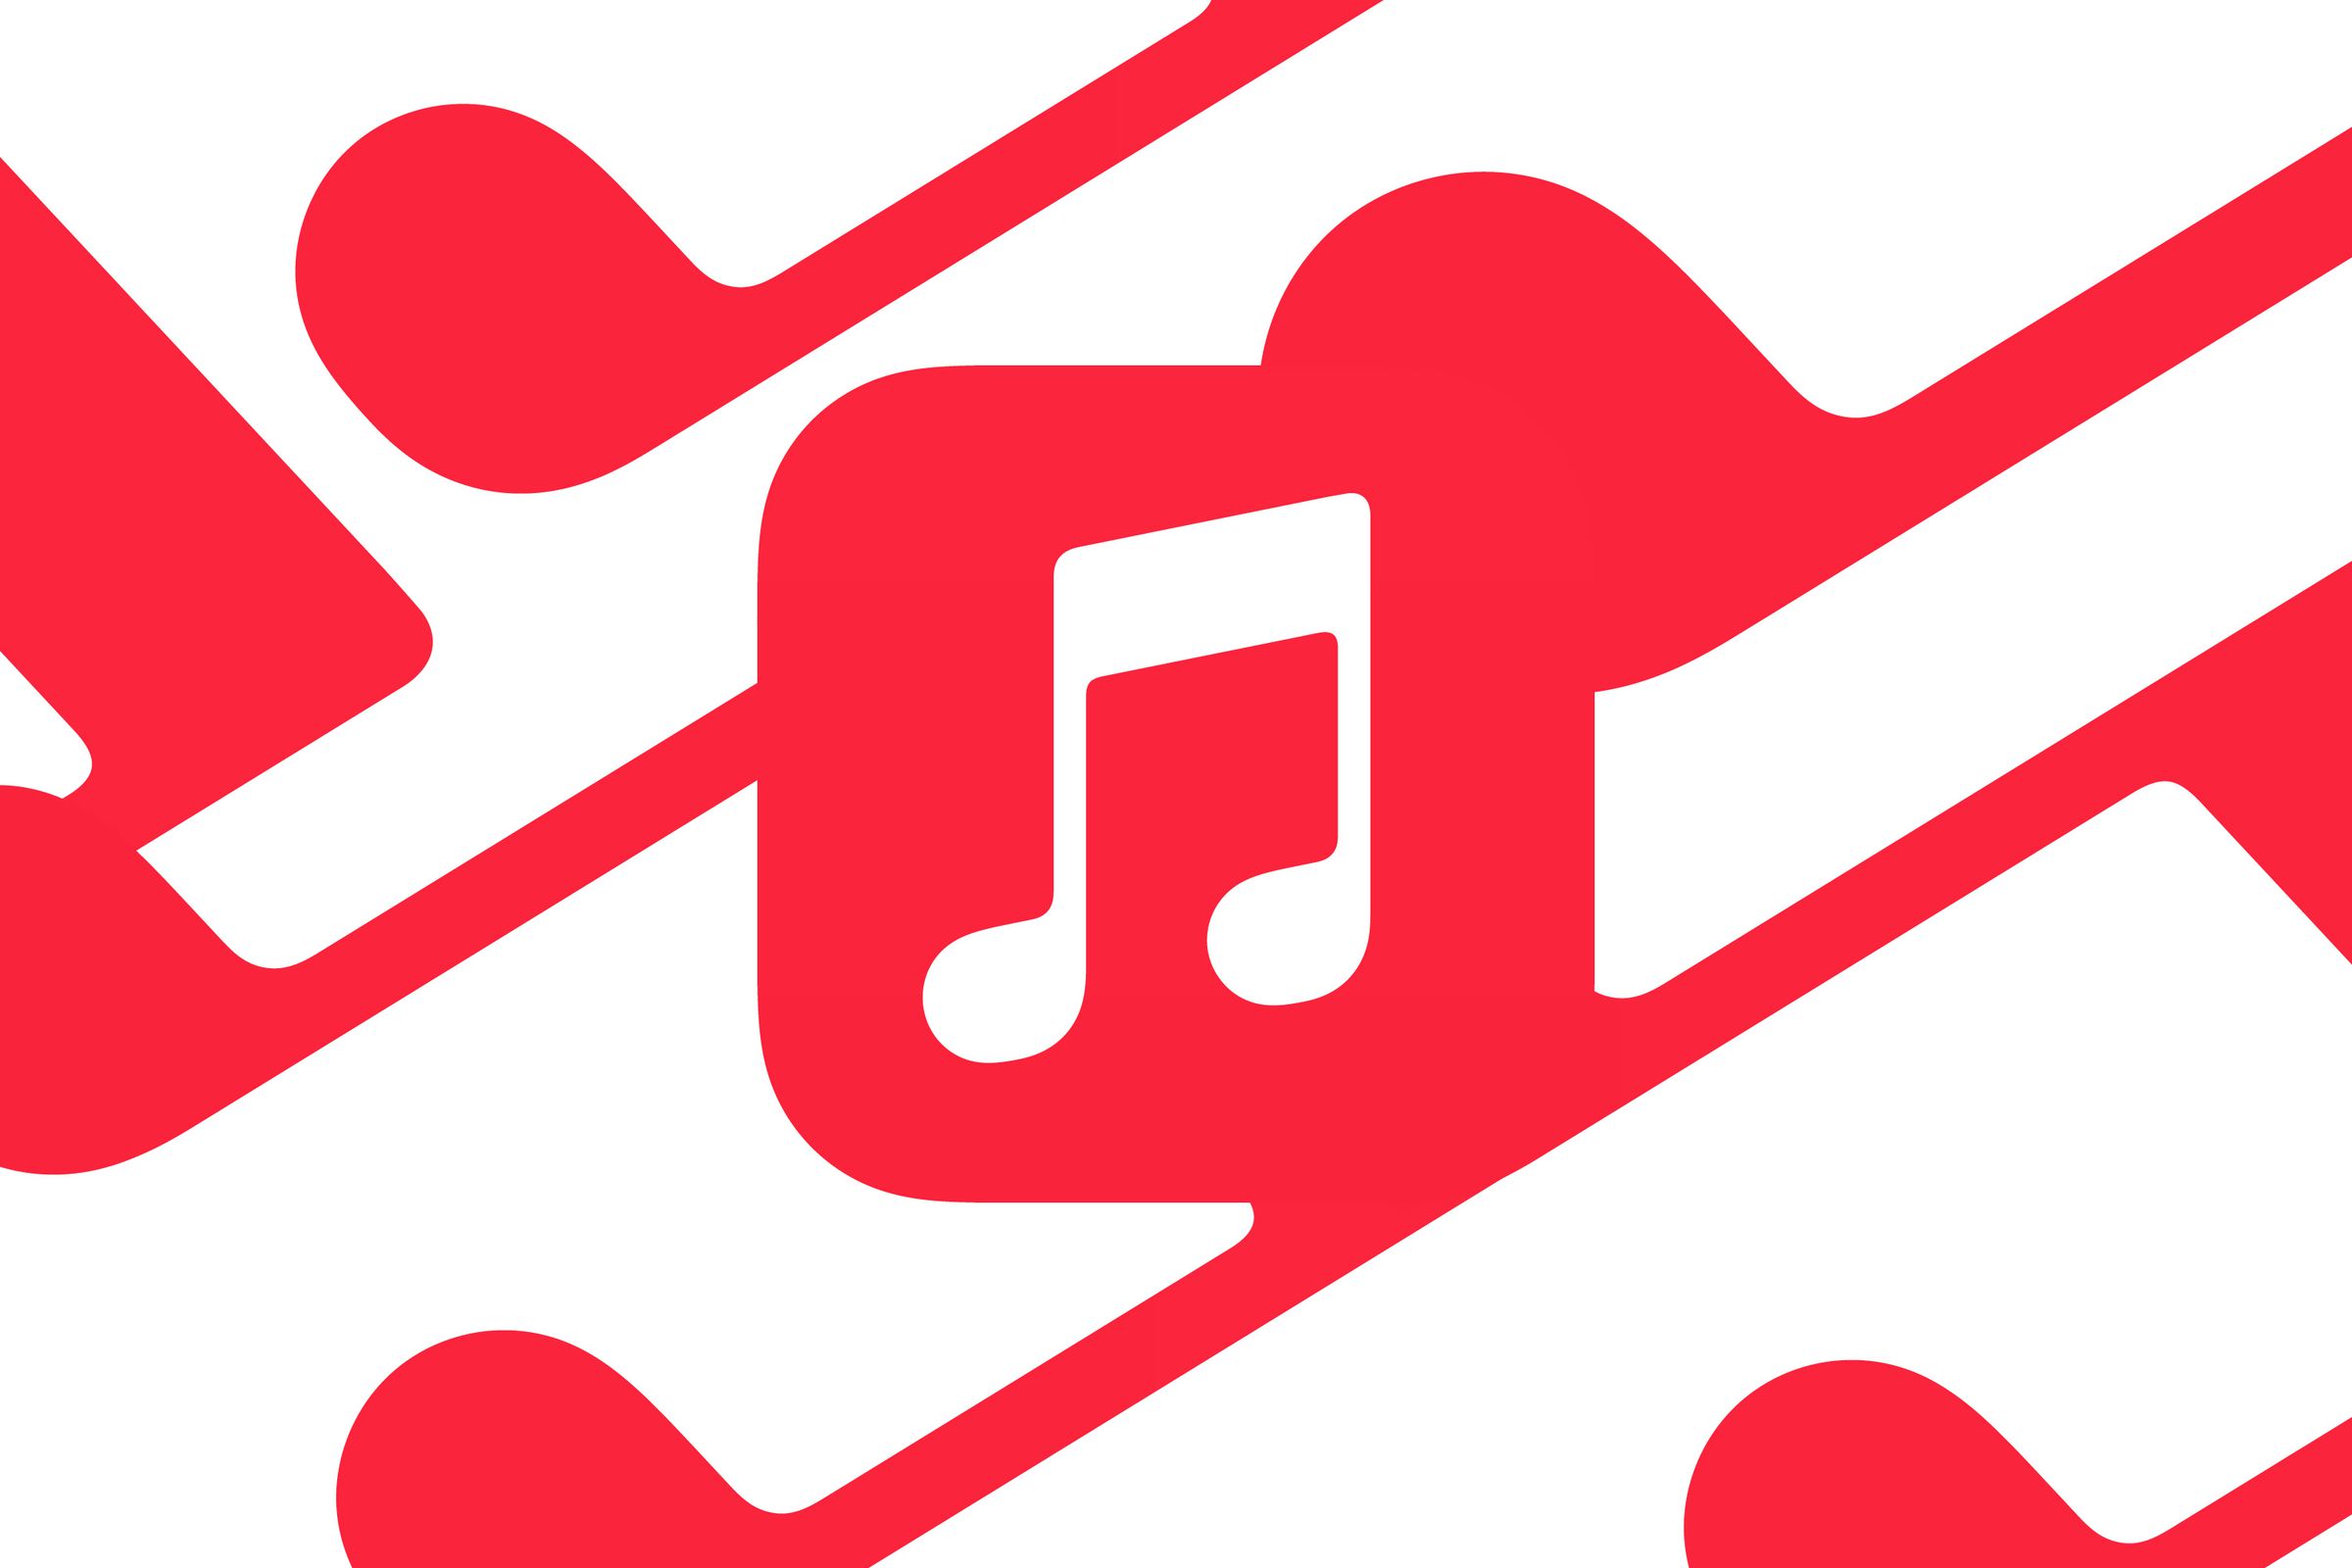 Apple Music logo, on red and white background